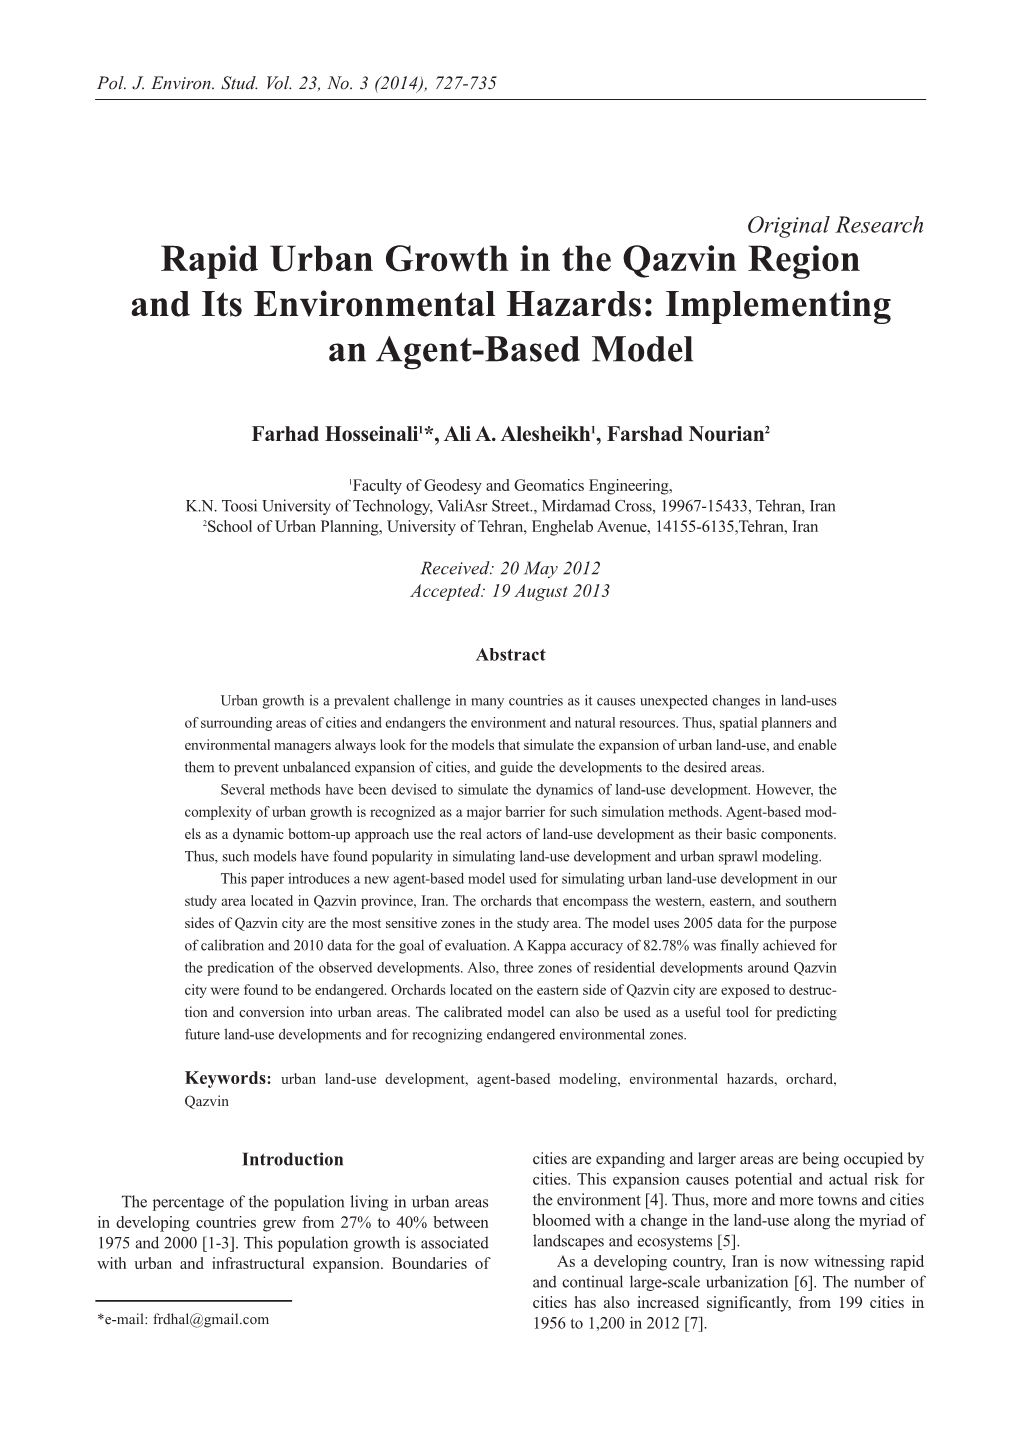 Rapid Urban Growth in the Qazvin Region and Its Environmental Hazards: Implementing an Agent-Based Model